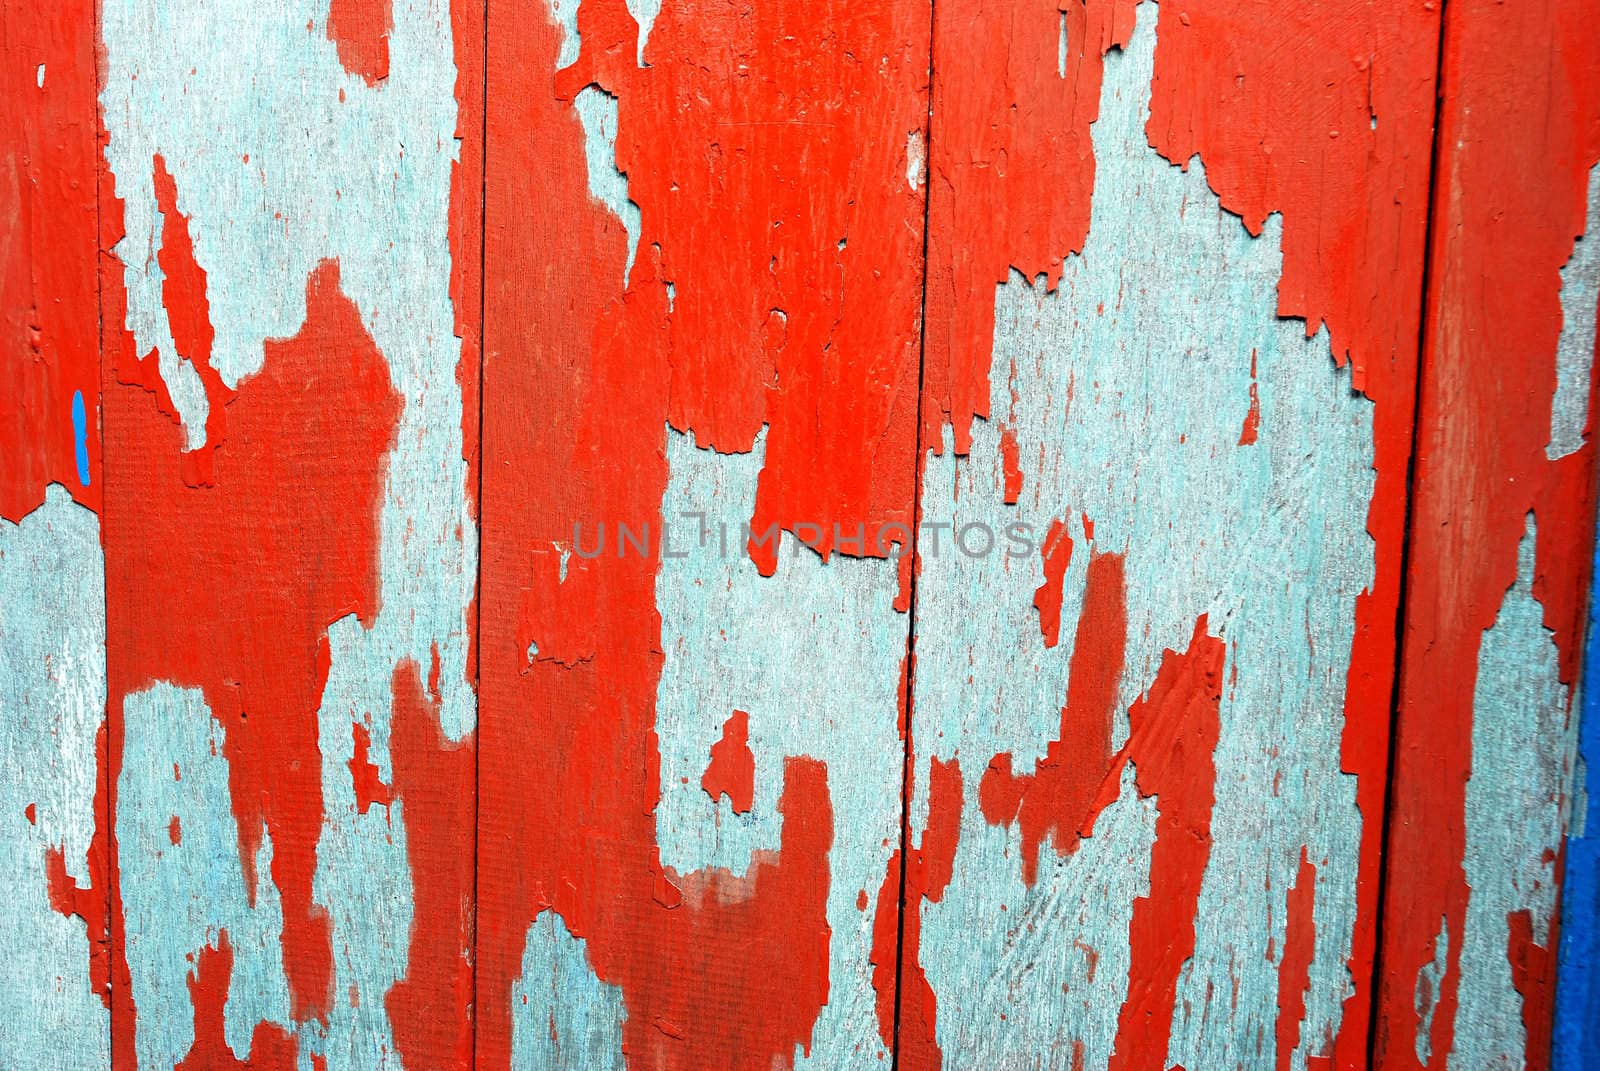 detailed of  texture and pattern at old wooden boards with paint that was peeling and faded